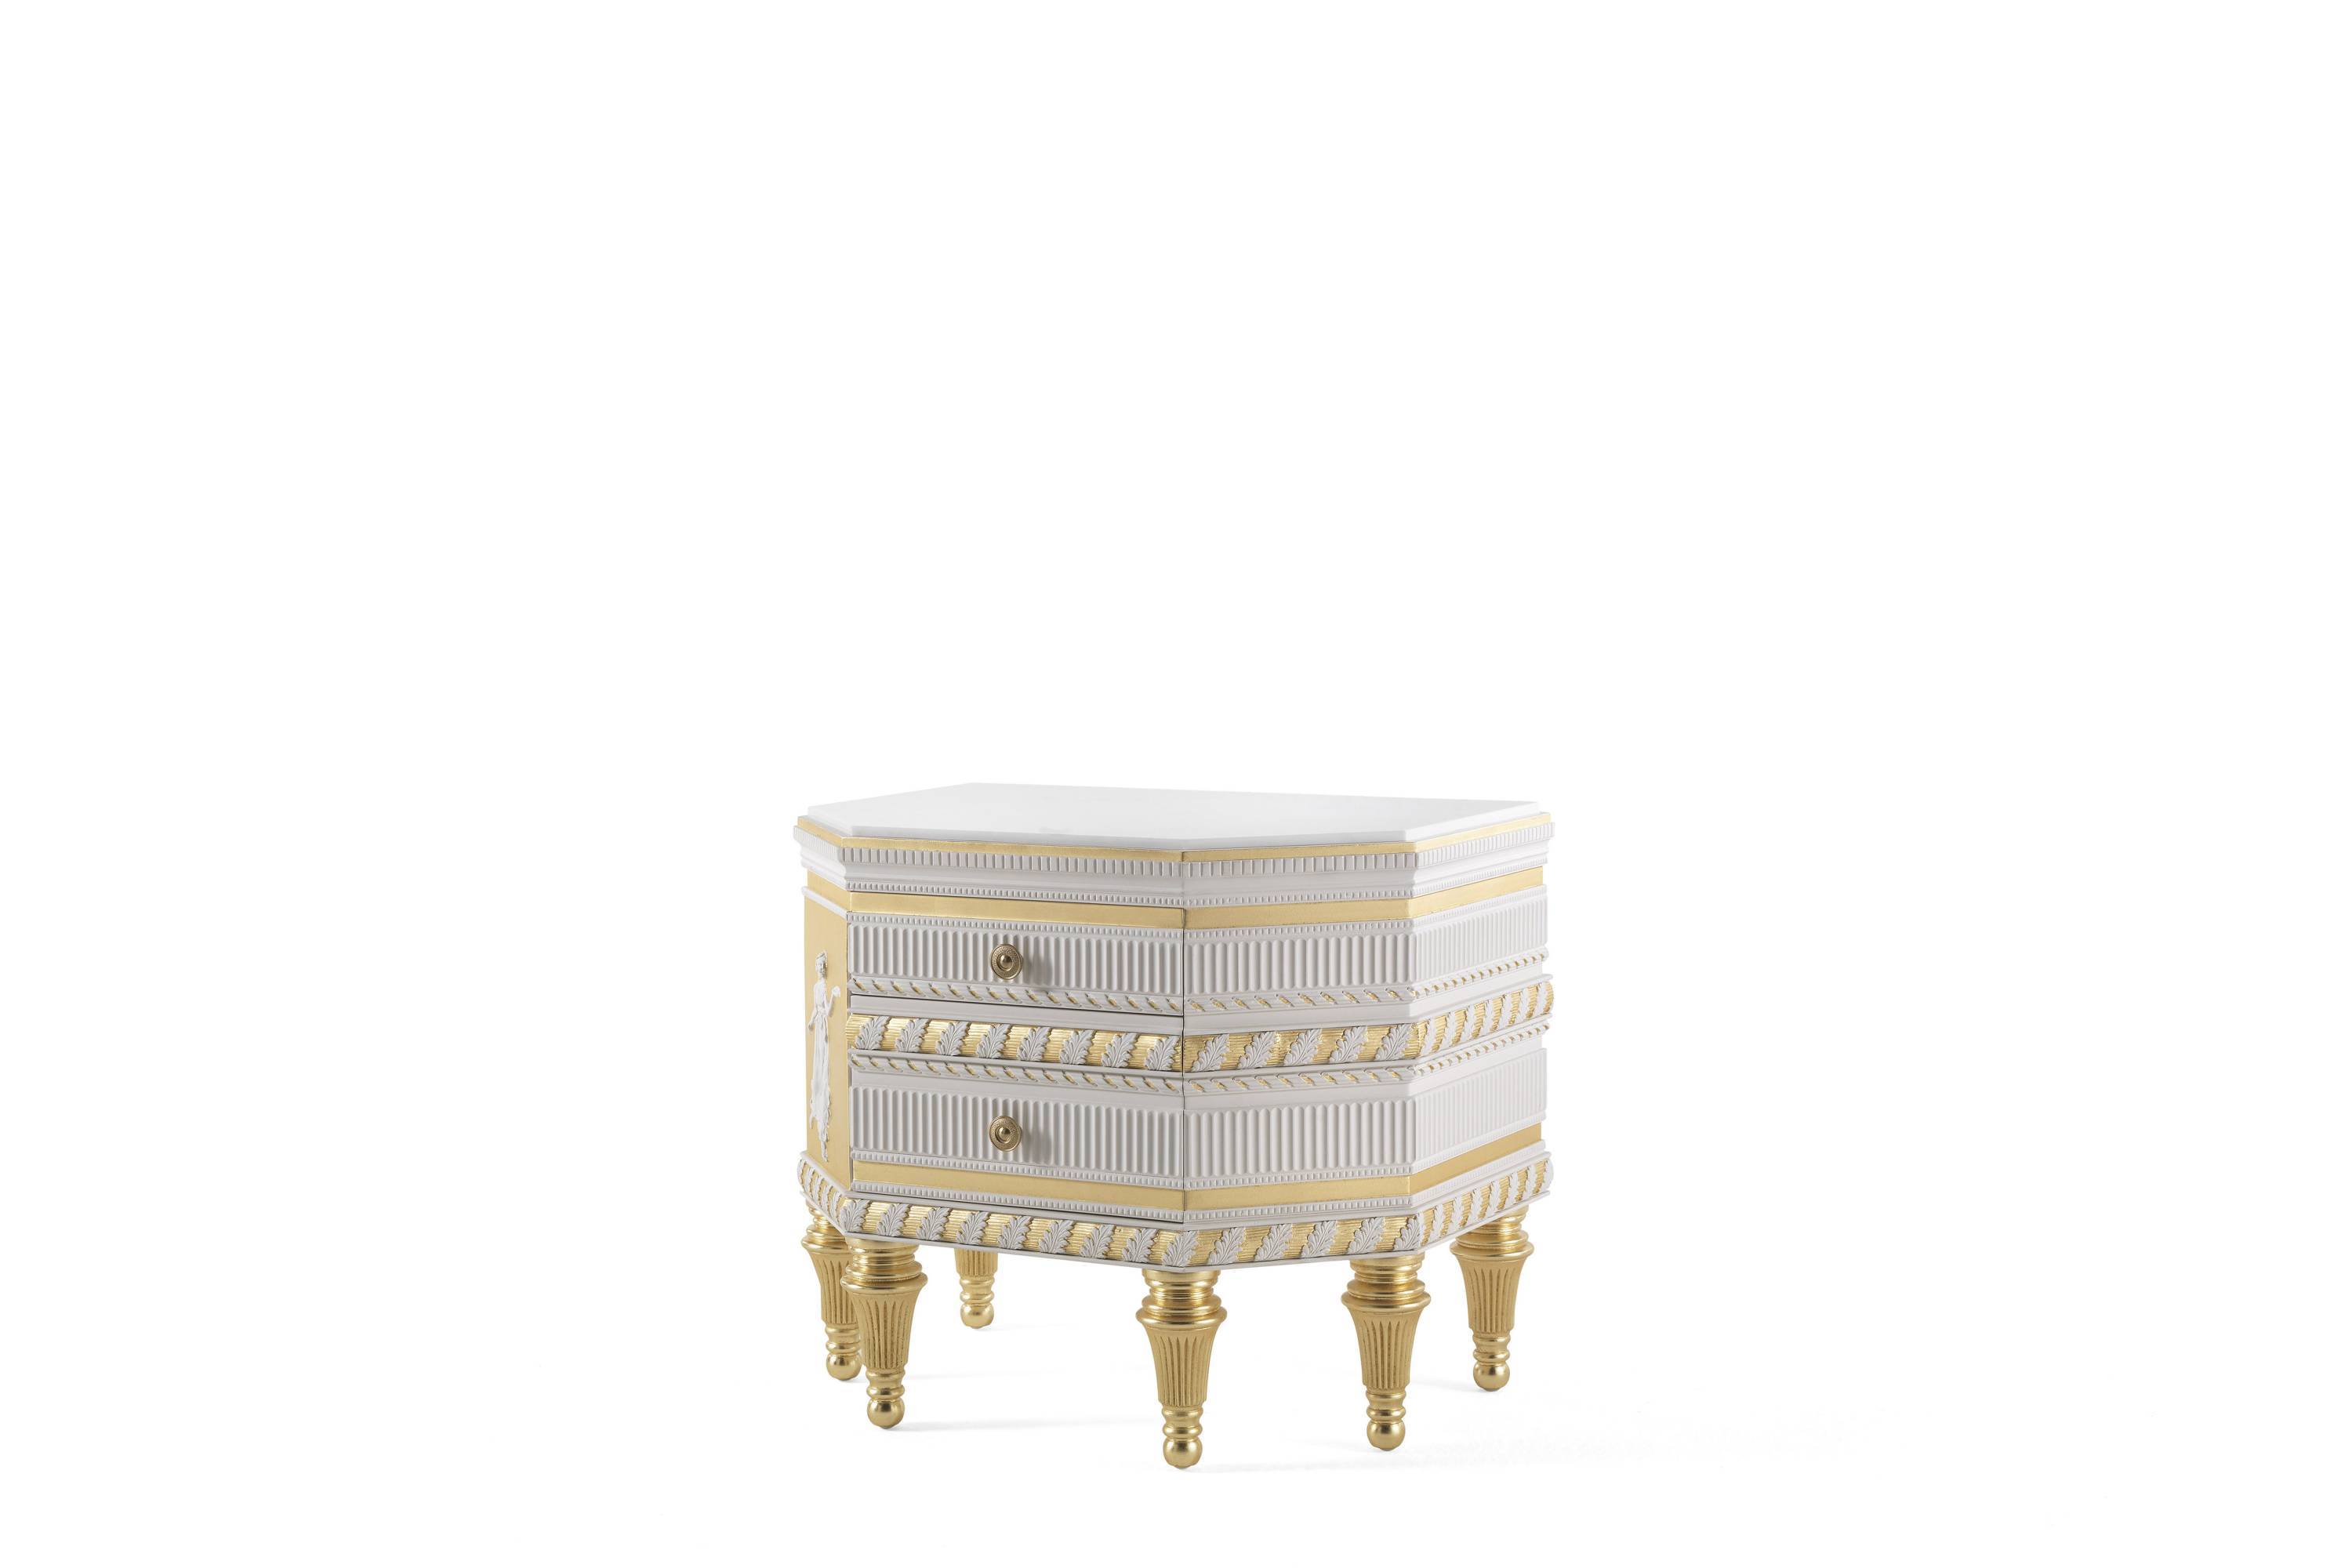 PORTLAND night table - convey elegance to each space with italian classic night storage units of the classic Oro Bianco collection